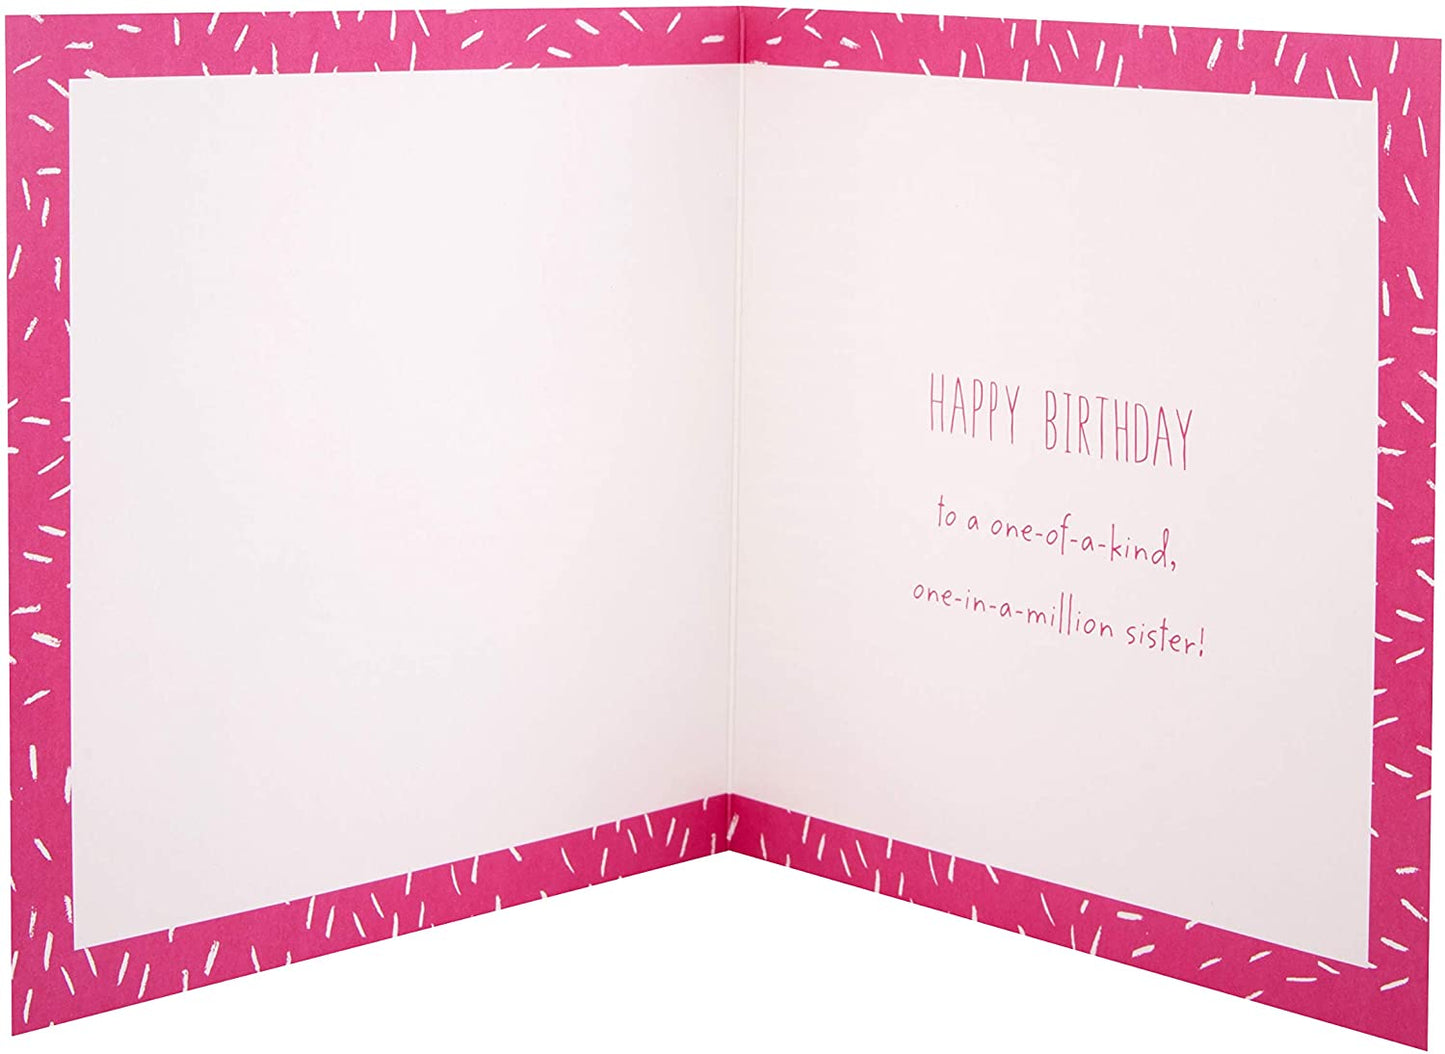 Special Sister Fresh Party Balloons Design Birthday Card